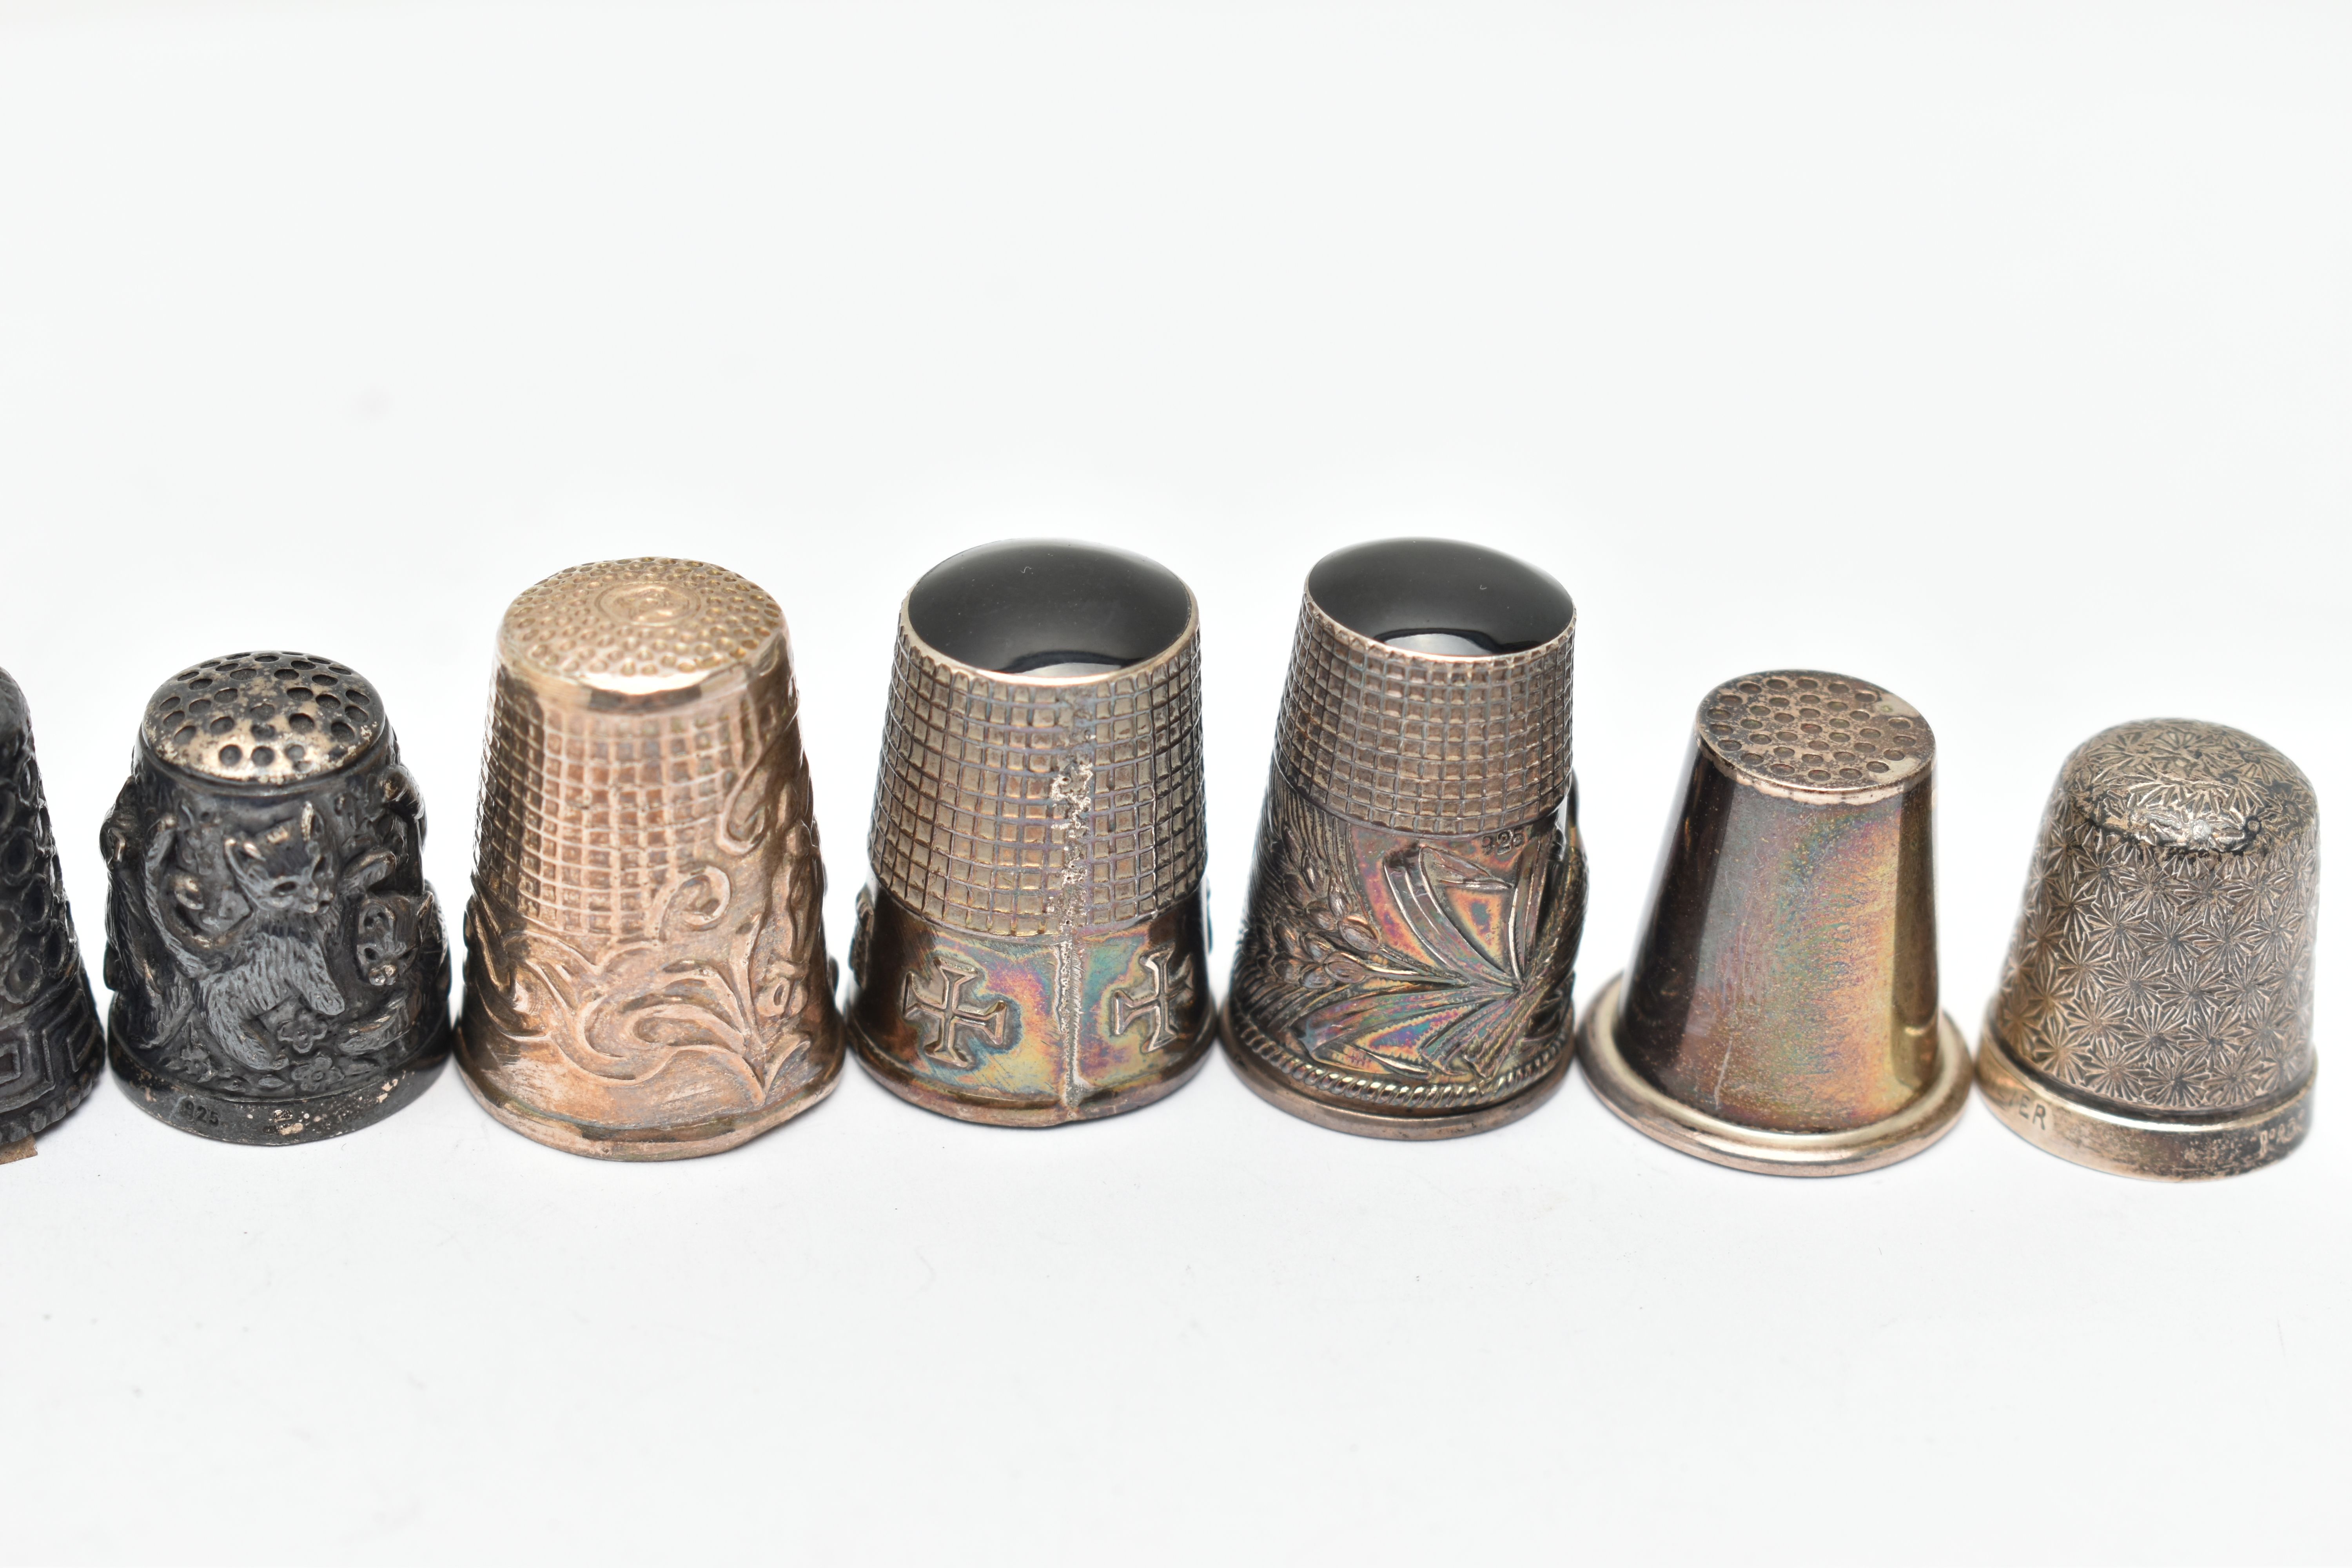 A BAG OF WHITE METAL THIMBLES, various designs and patterns, some set with semi-precious stone - Image 10 of 10